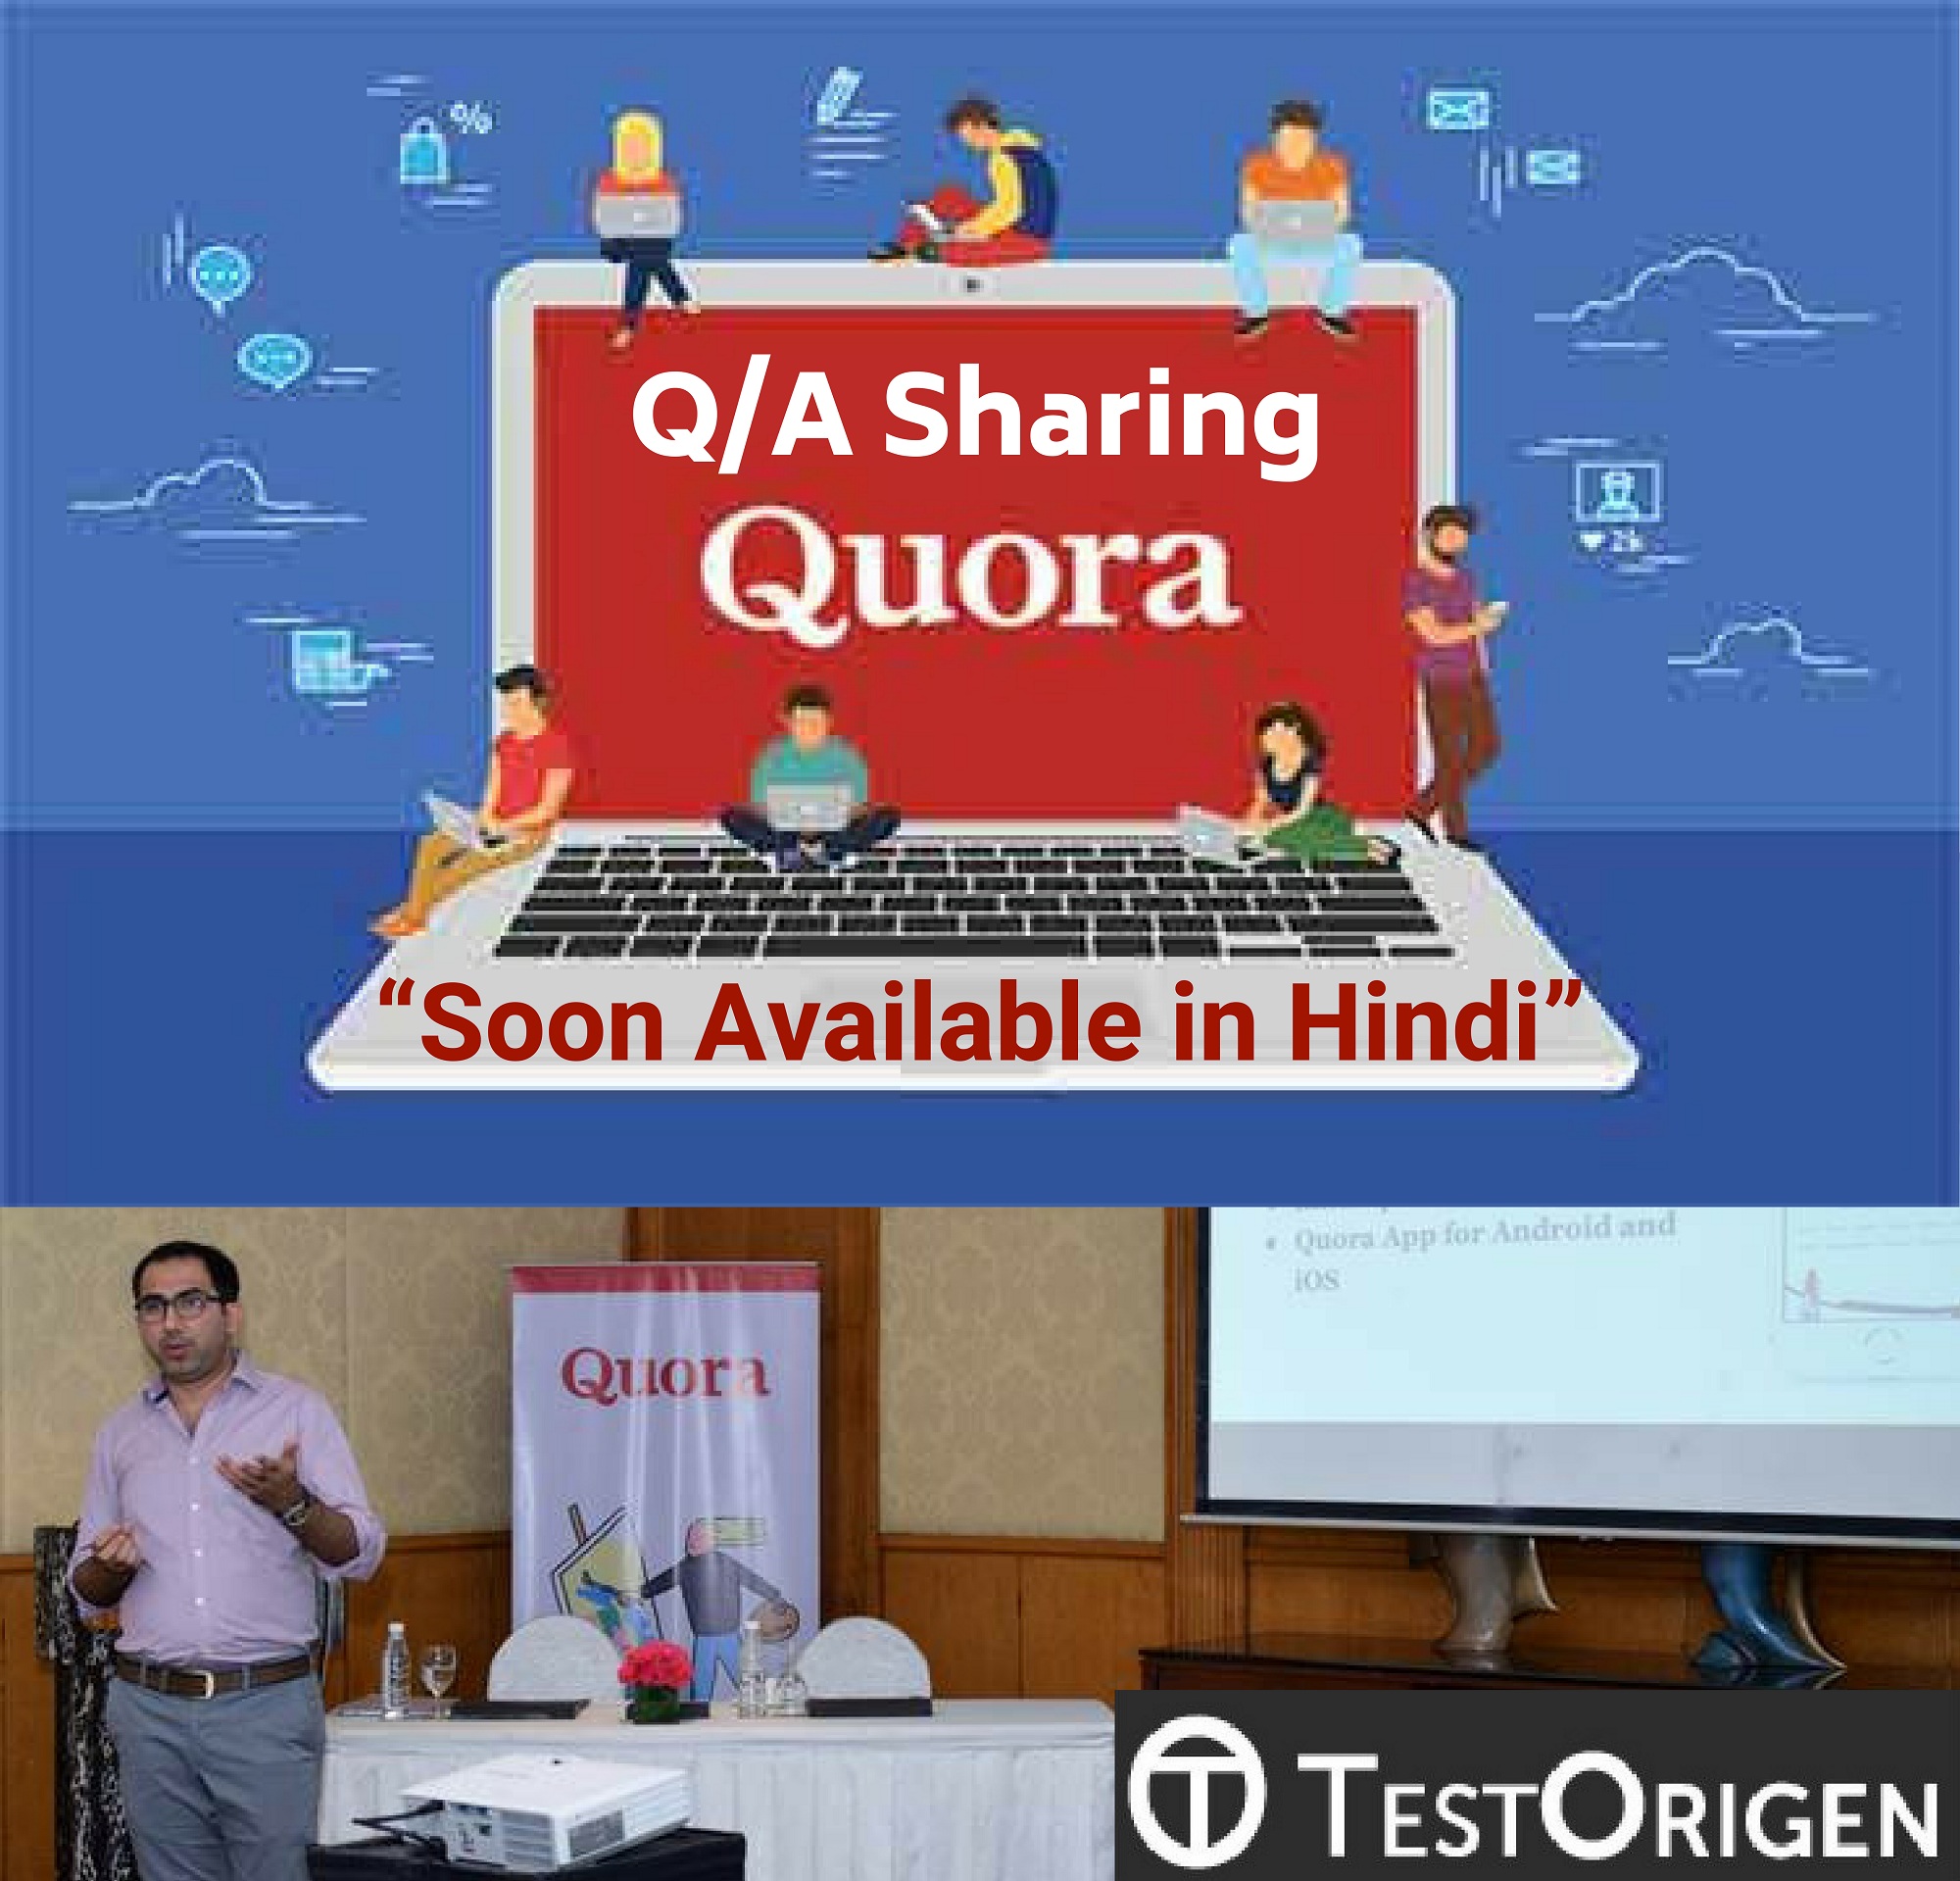 Q/A Sharing Quora, “Soon Available in Hindi”